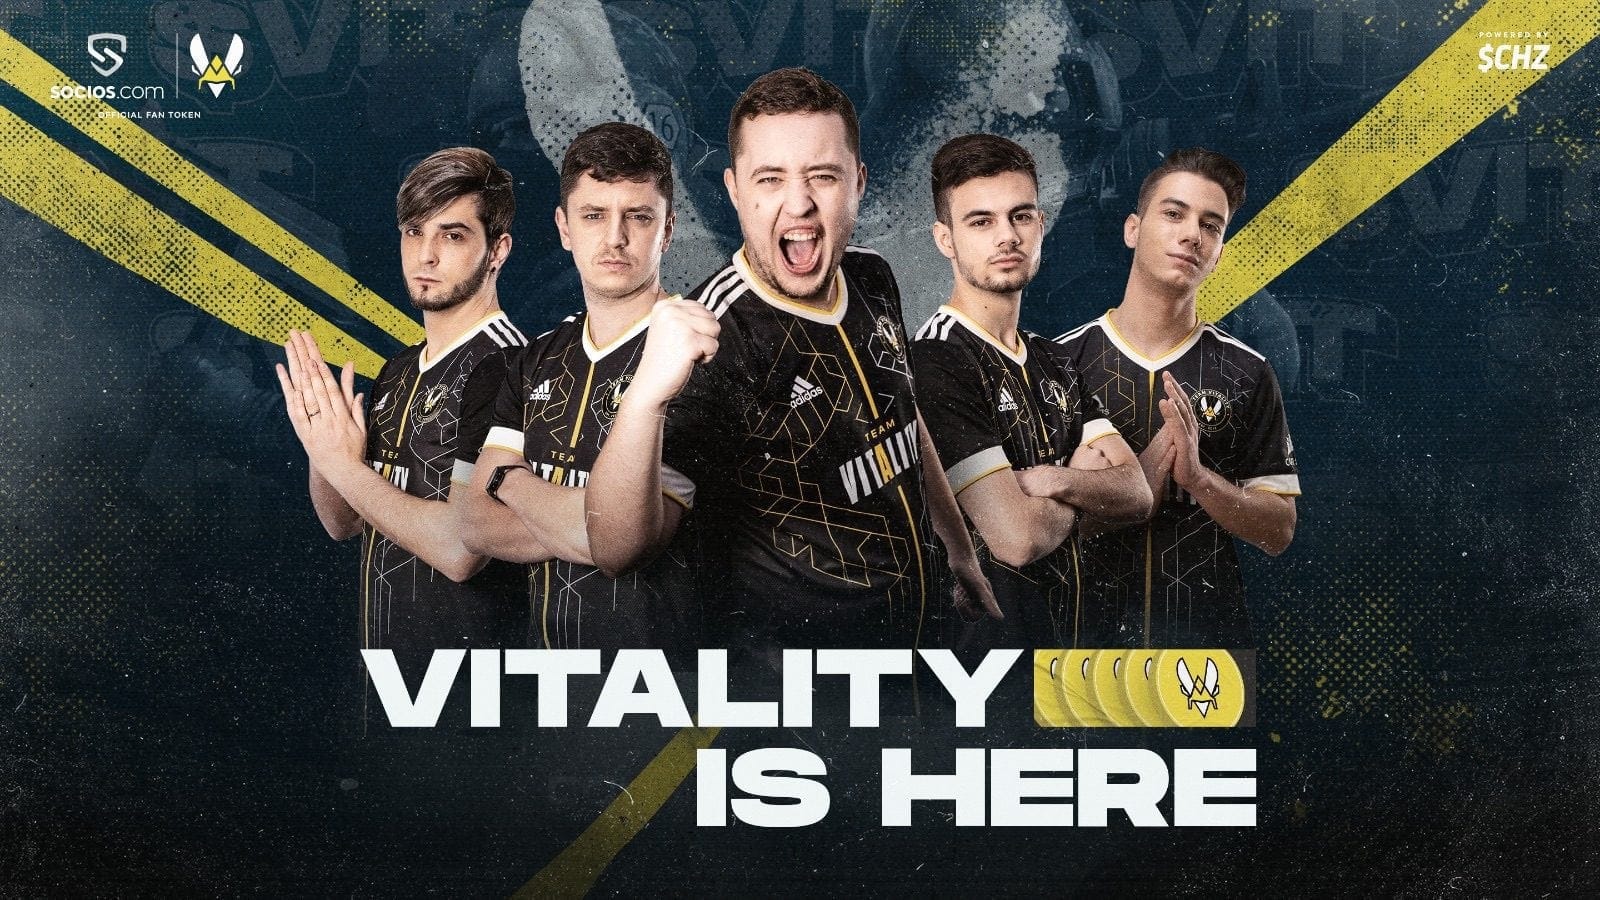 French Esports Giants Team Vitality Set For Global Expansion With   Fan Token Launch On July 1st - Socios